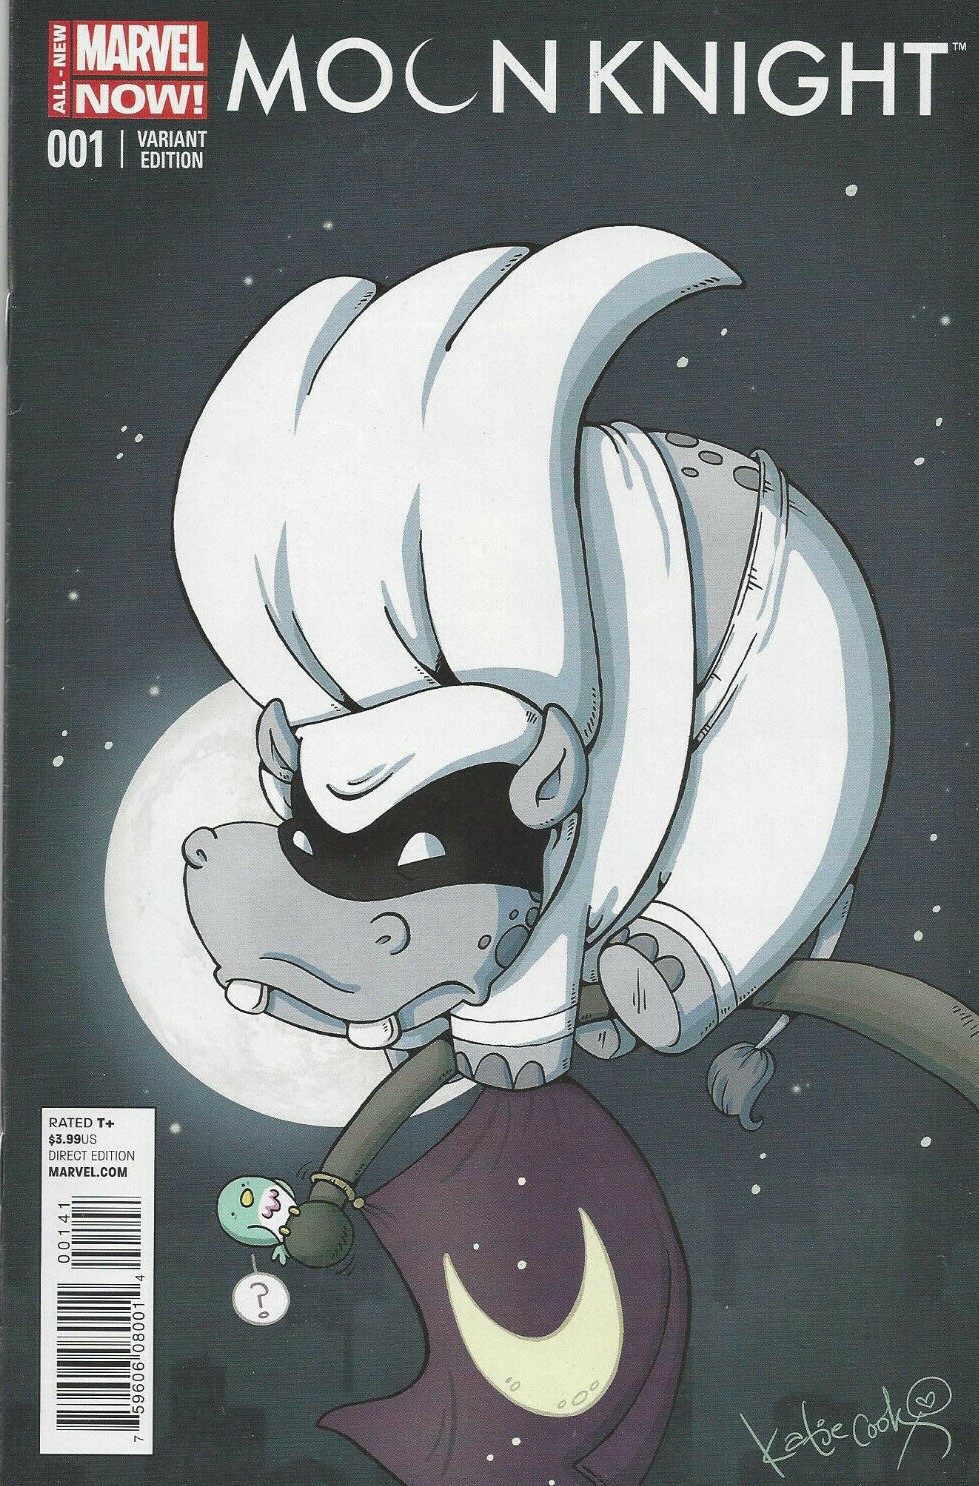 Moon Knight #1 Cook Animal Variant